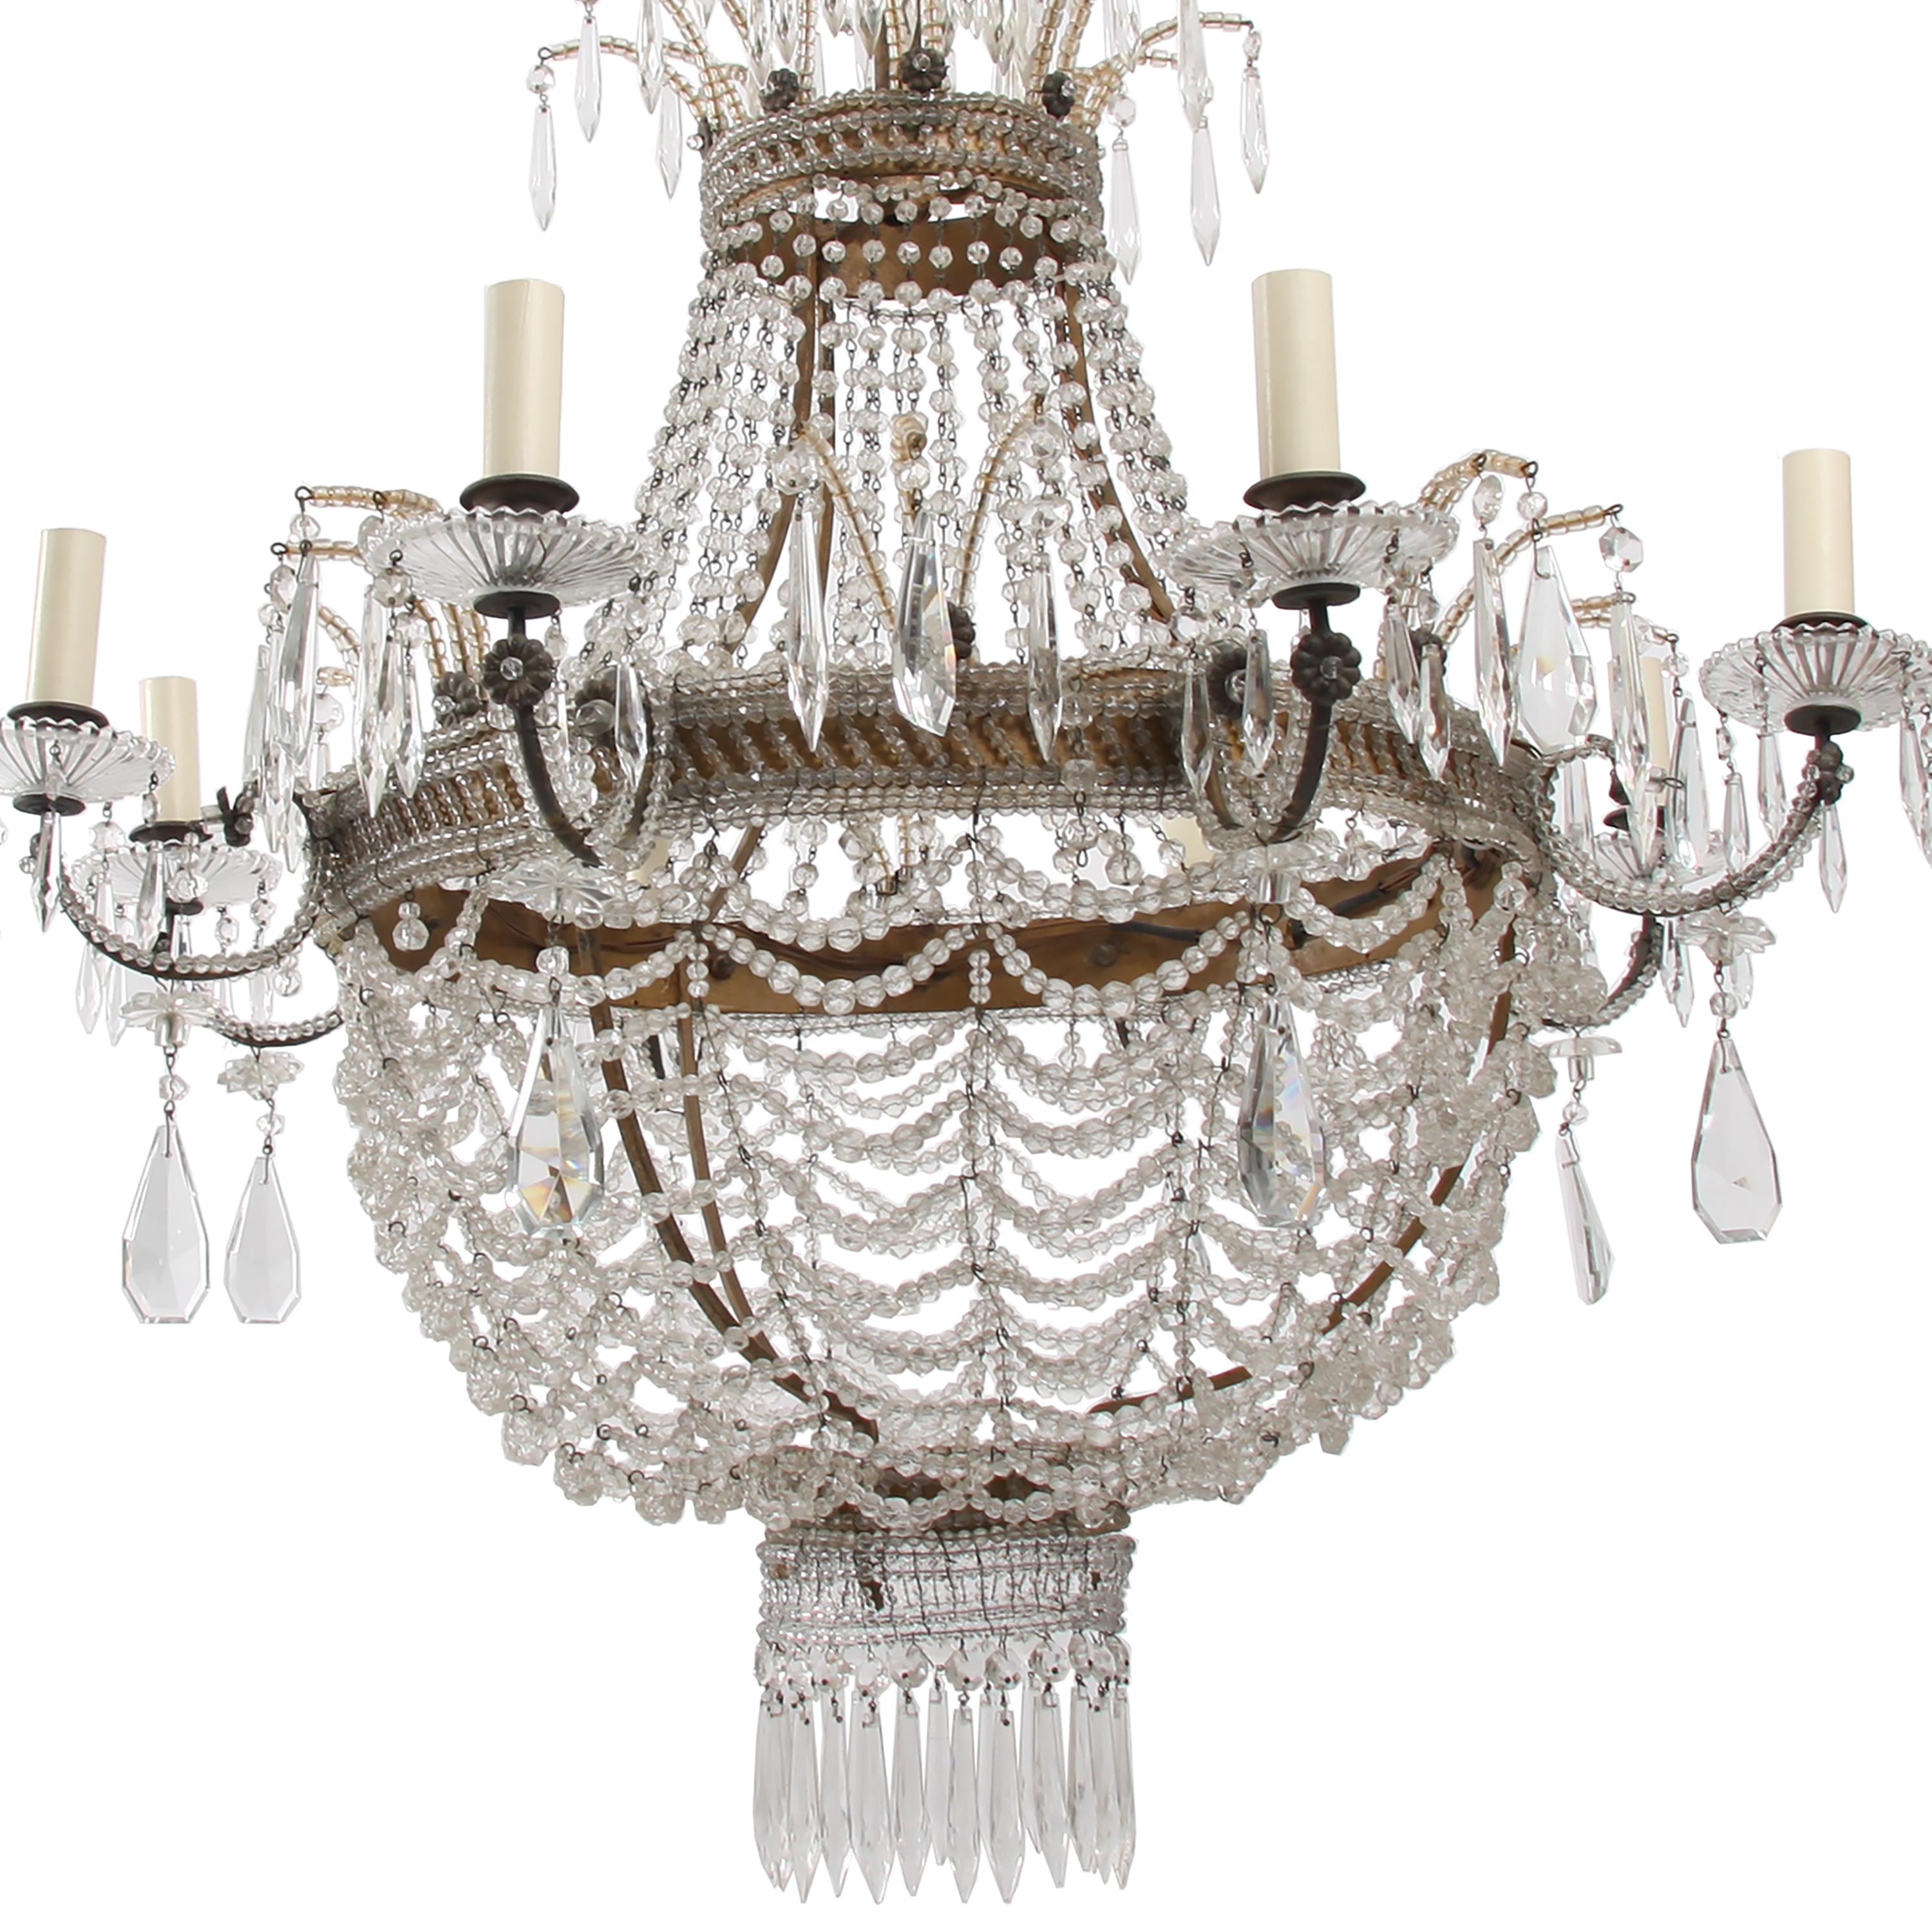 Beautiful large Italian 'basket' style chandelier. This stunning piece features 8 arms, gorgeous detail and was made in the mid-20th century.

Rewired.